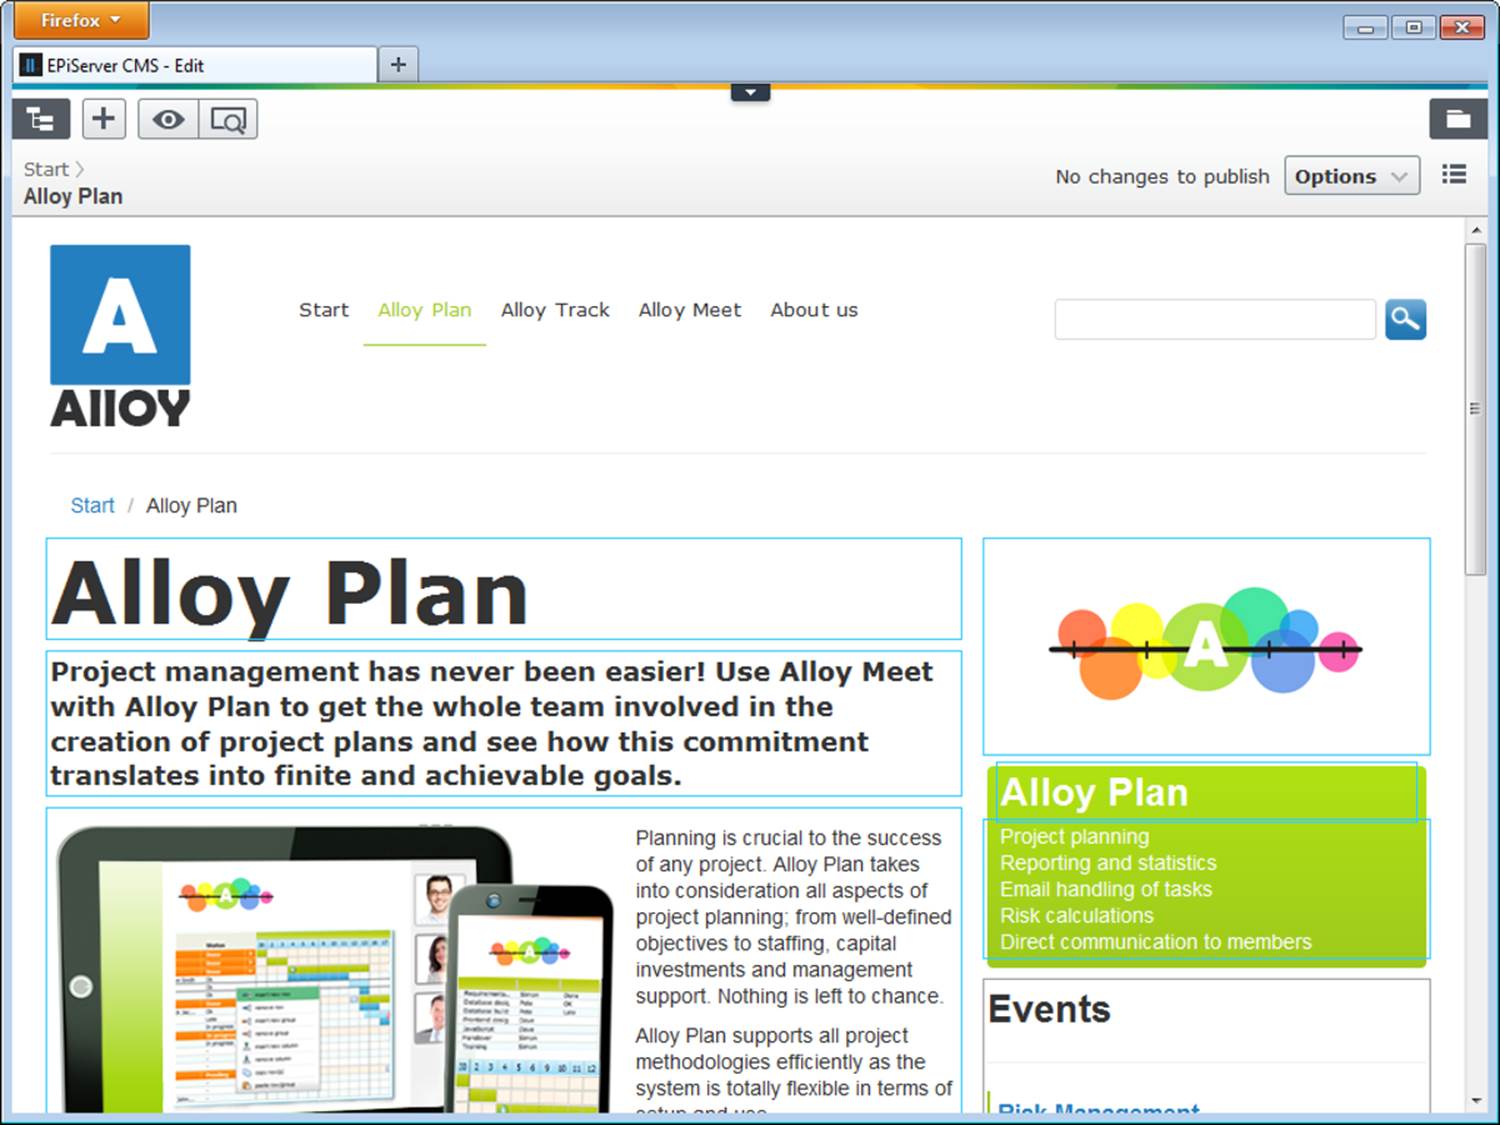 EPiServer CMS' edit mode after clicking on the "Alloy Plan" link in the site's top navigation.